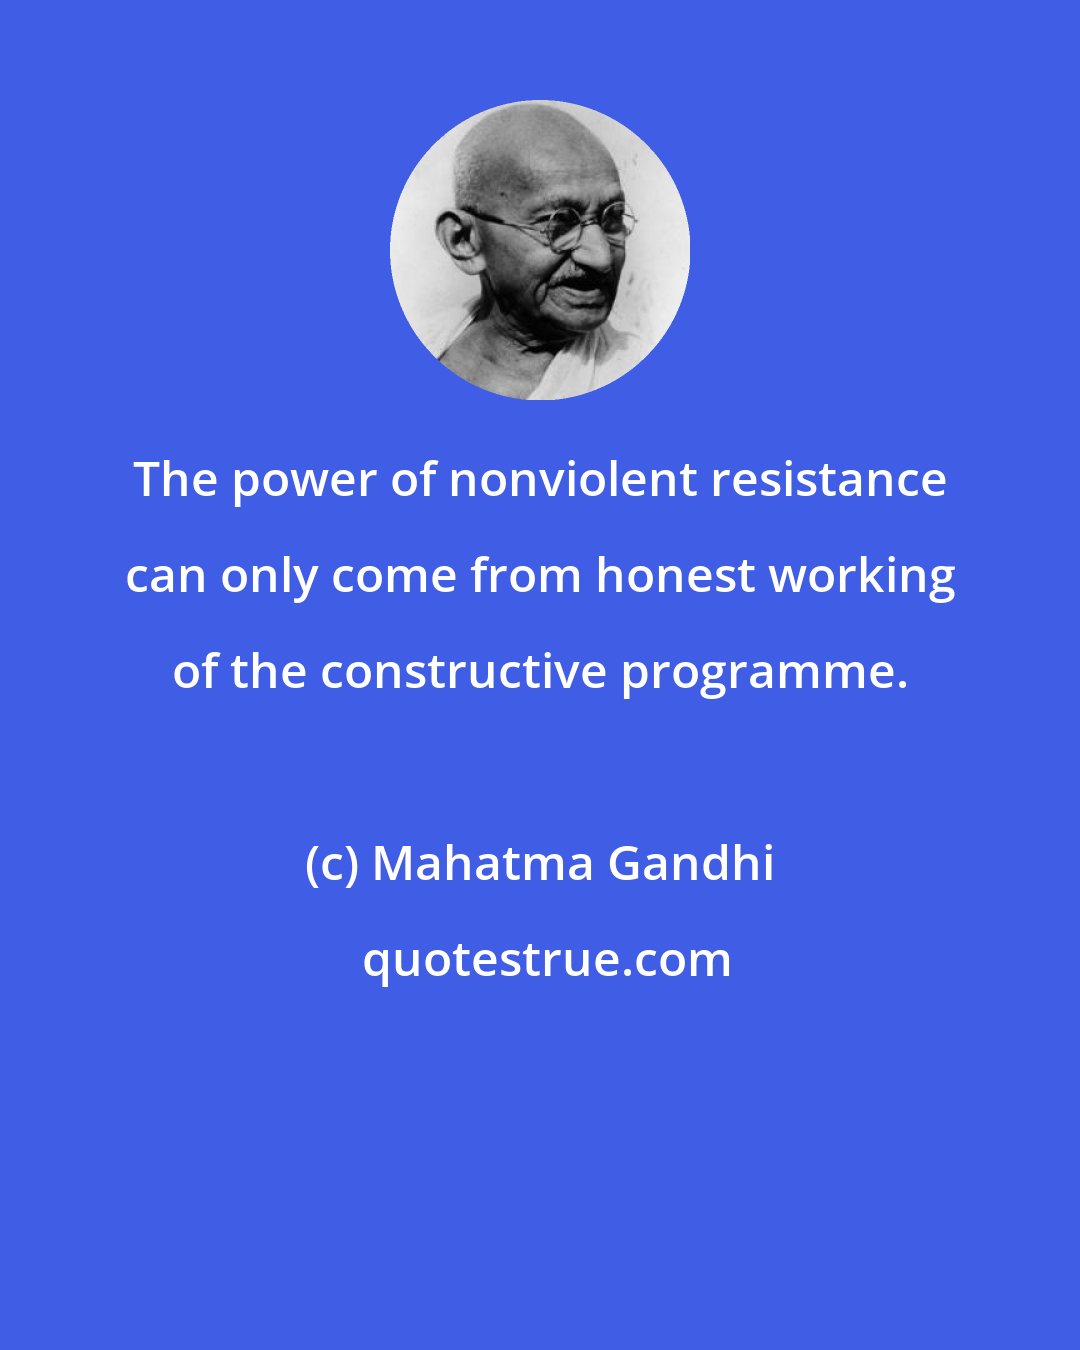 Mahatma Gandhi: The power of nonviolent resistance can only come from honest working of the constructive programme.